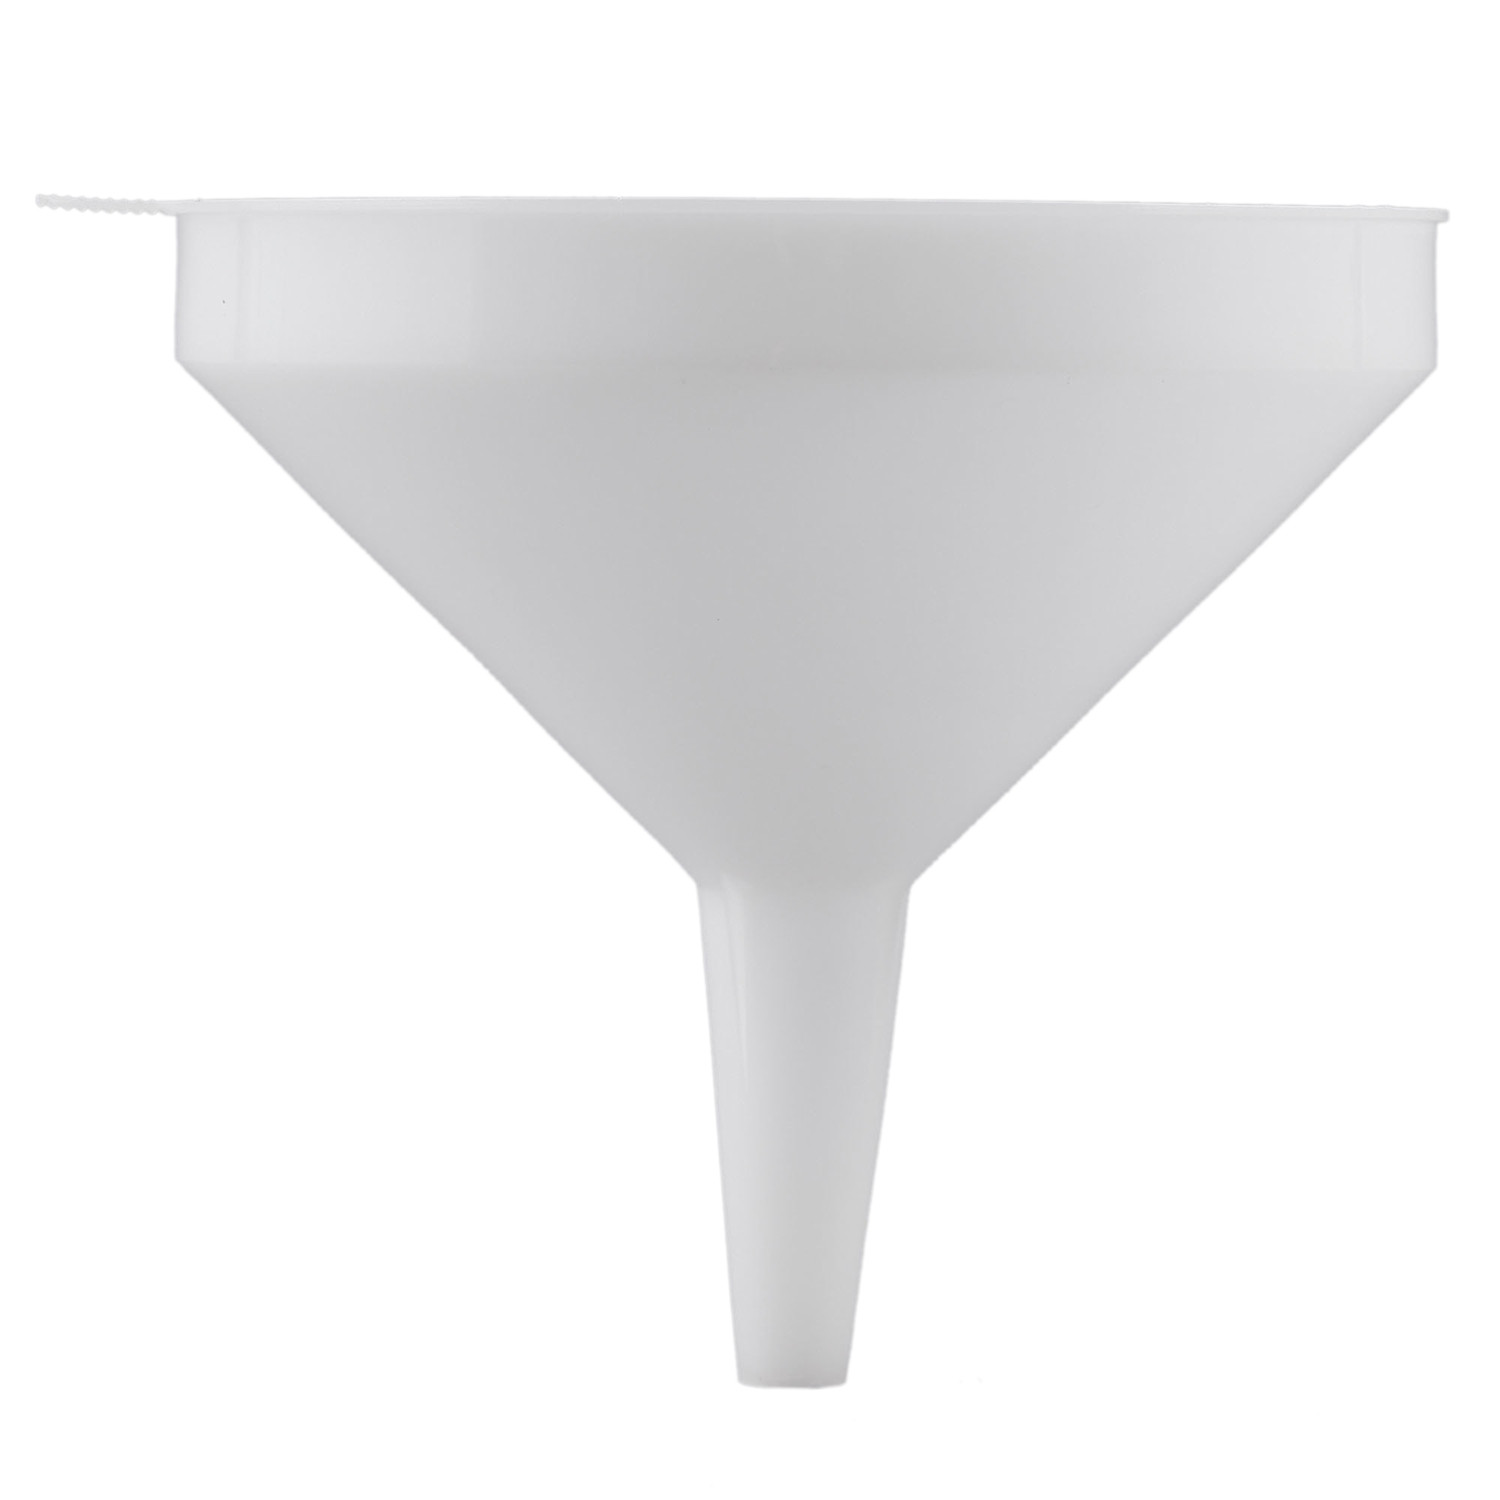 Kuber Industries Multiuses Wide-Mouth Plastic Funnel For Pouring (Tranasparent)